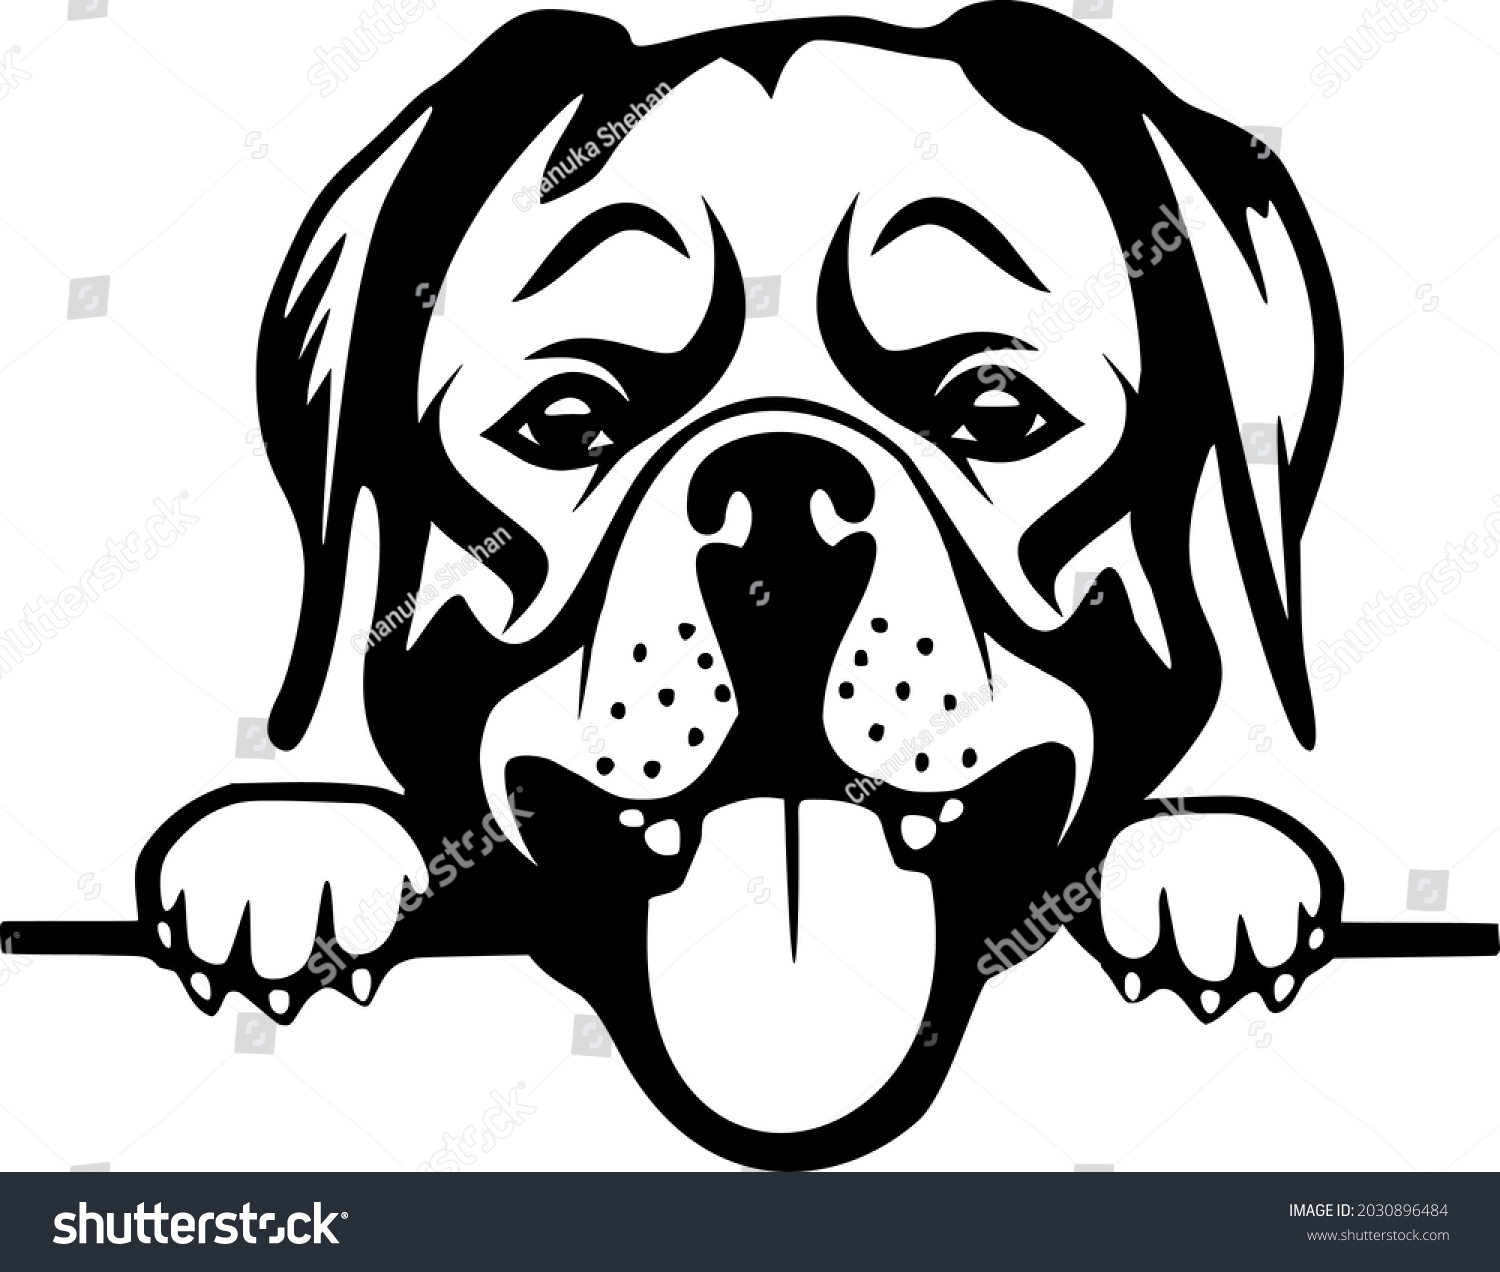 Rottweiler Smiling Dog Breed Logo Clipart Stock Vector (Royalty Free ...